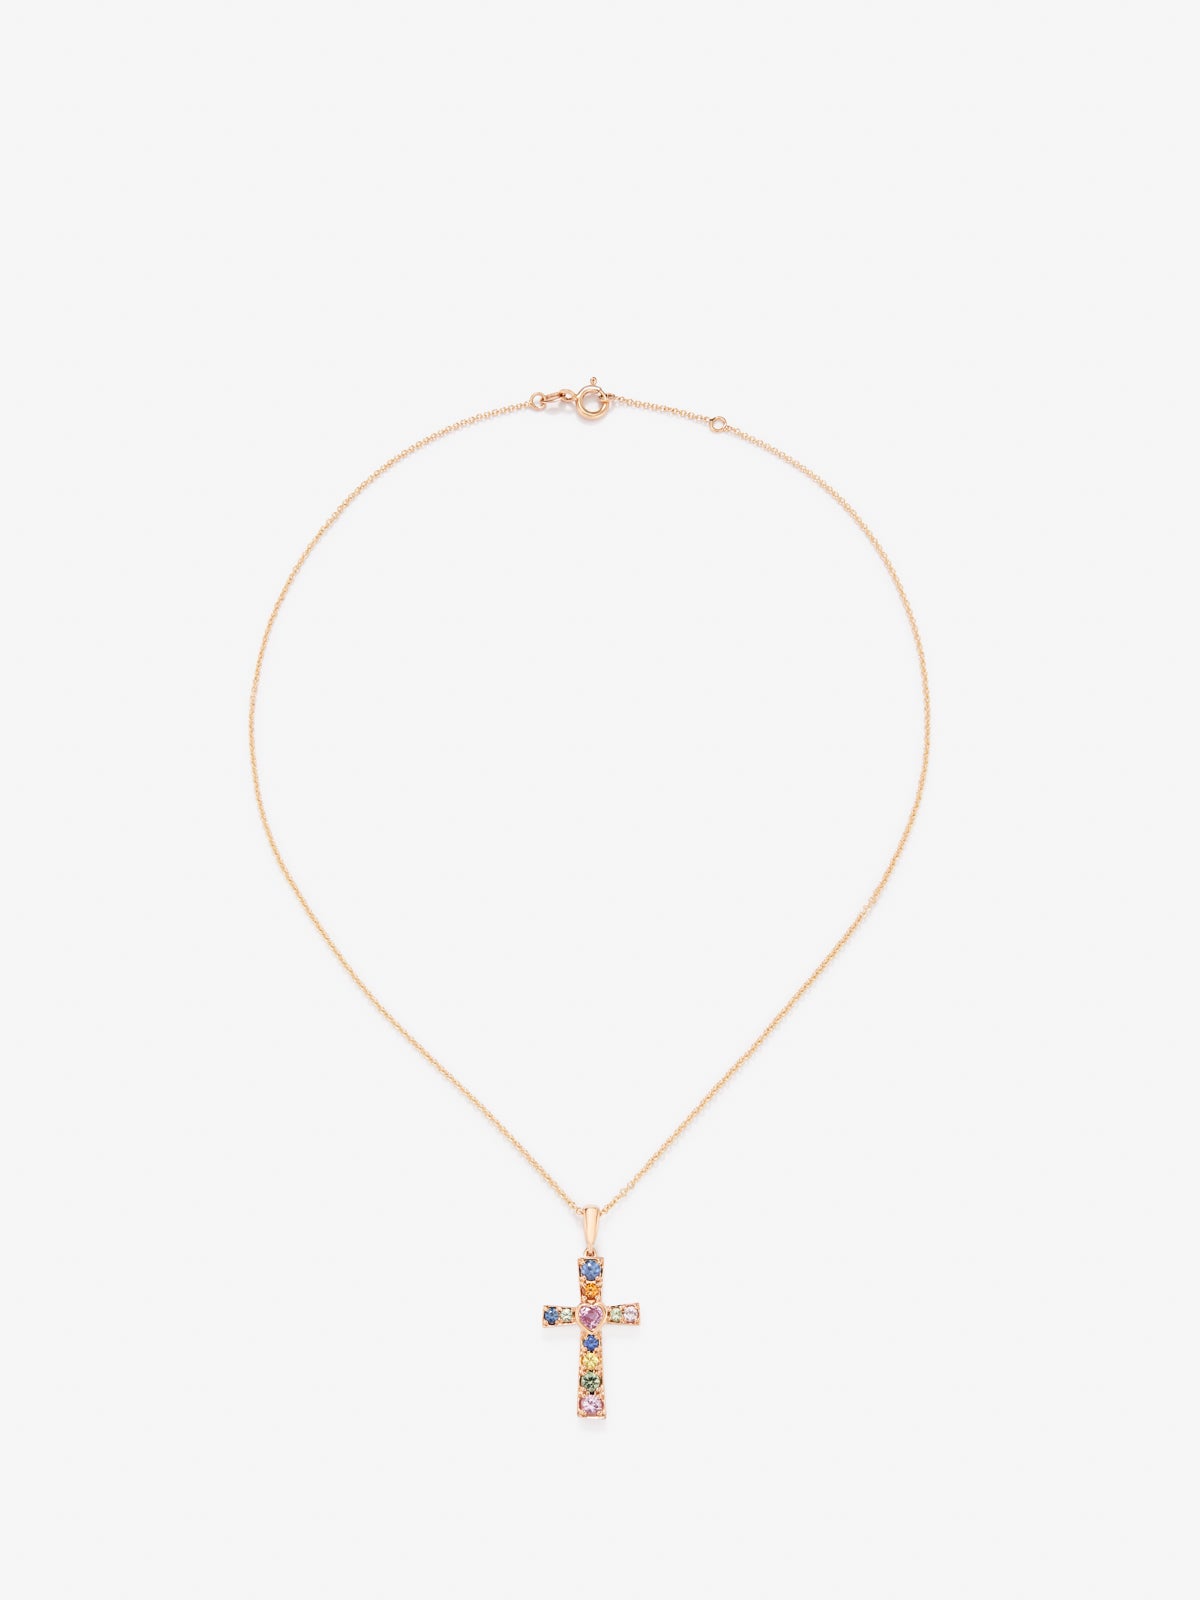 18K Rose Gold Cross Pendant Chain with Sapphire